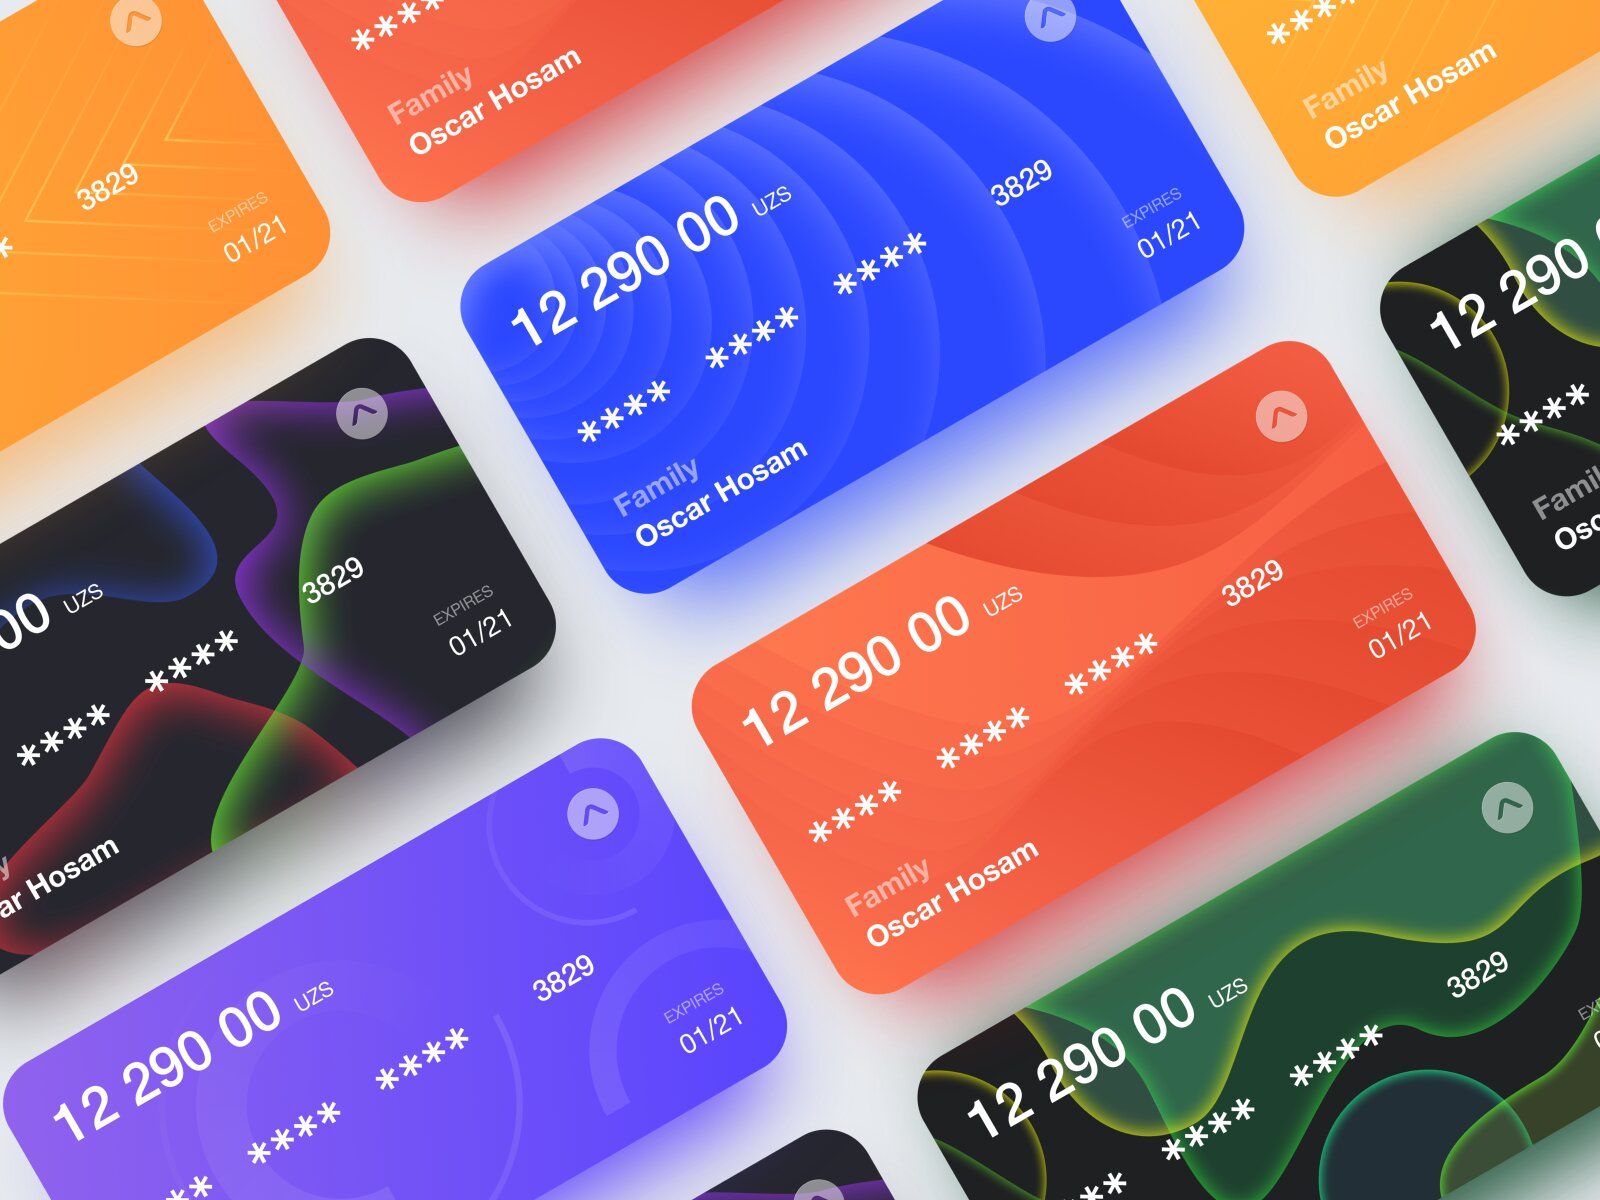 Bank websites are often used by financial institutions such as bank and other parties in the banking industry (*image by [OSCAR™](https://dribbble.com/Oscar_Hosam){ rel="nofollow" .default-md}*)